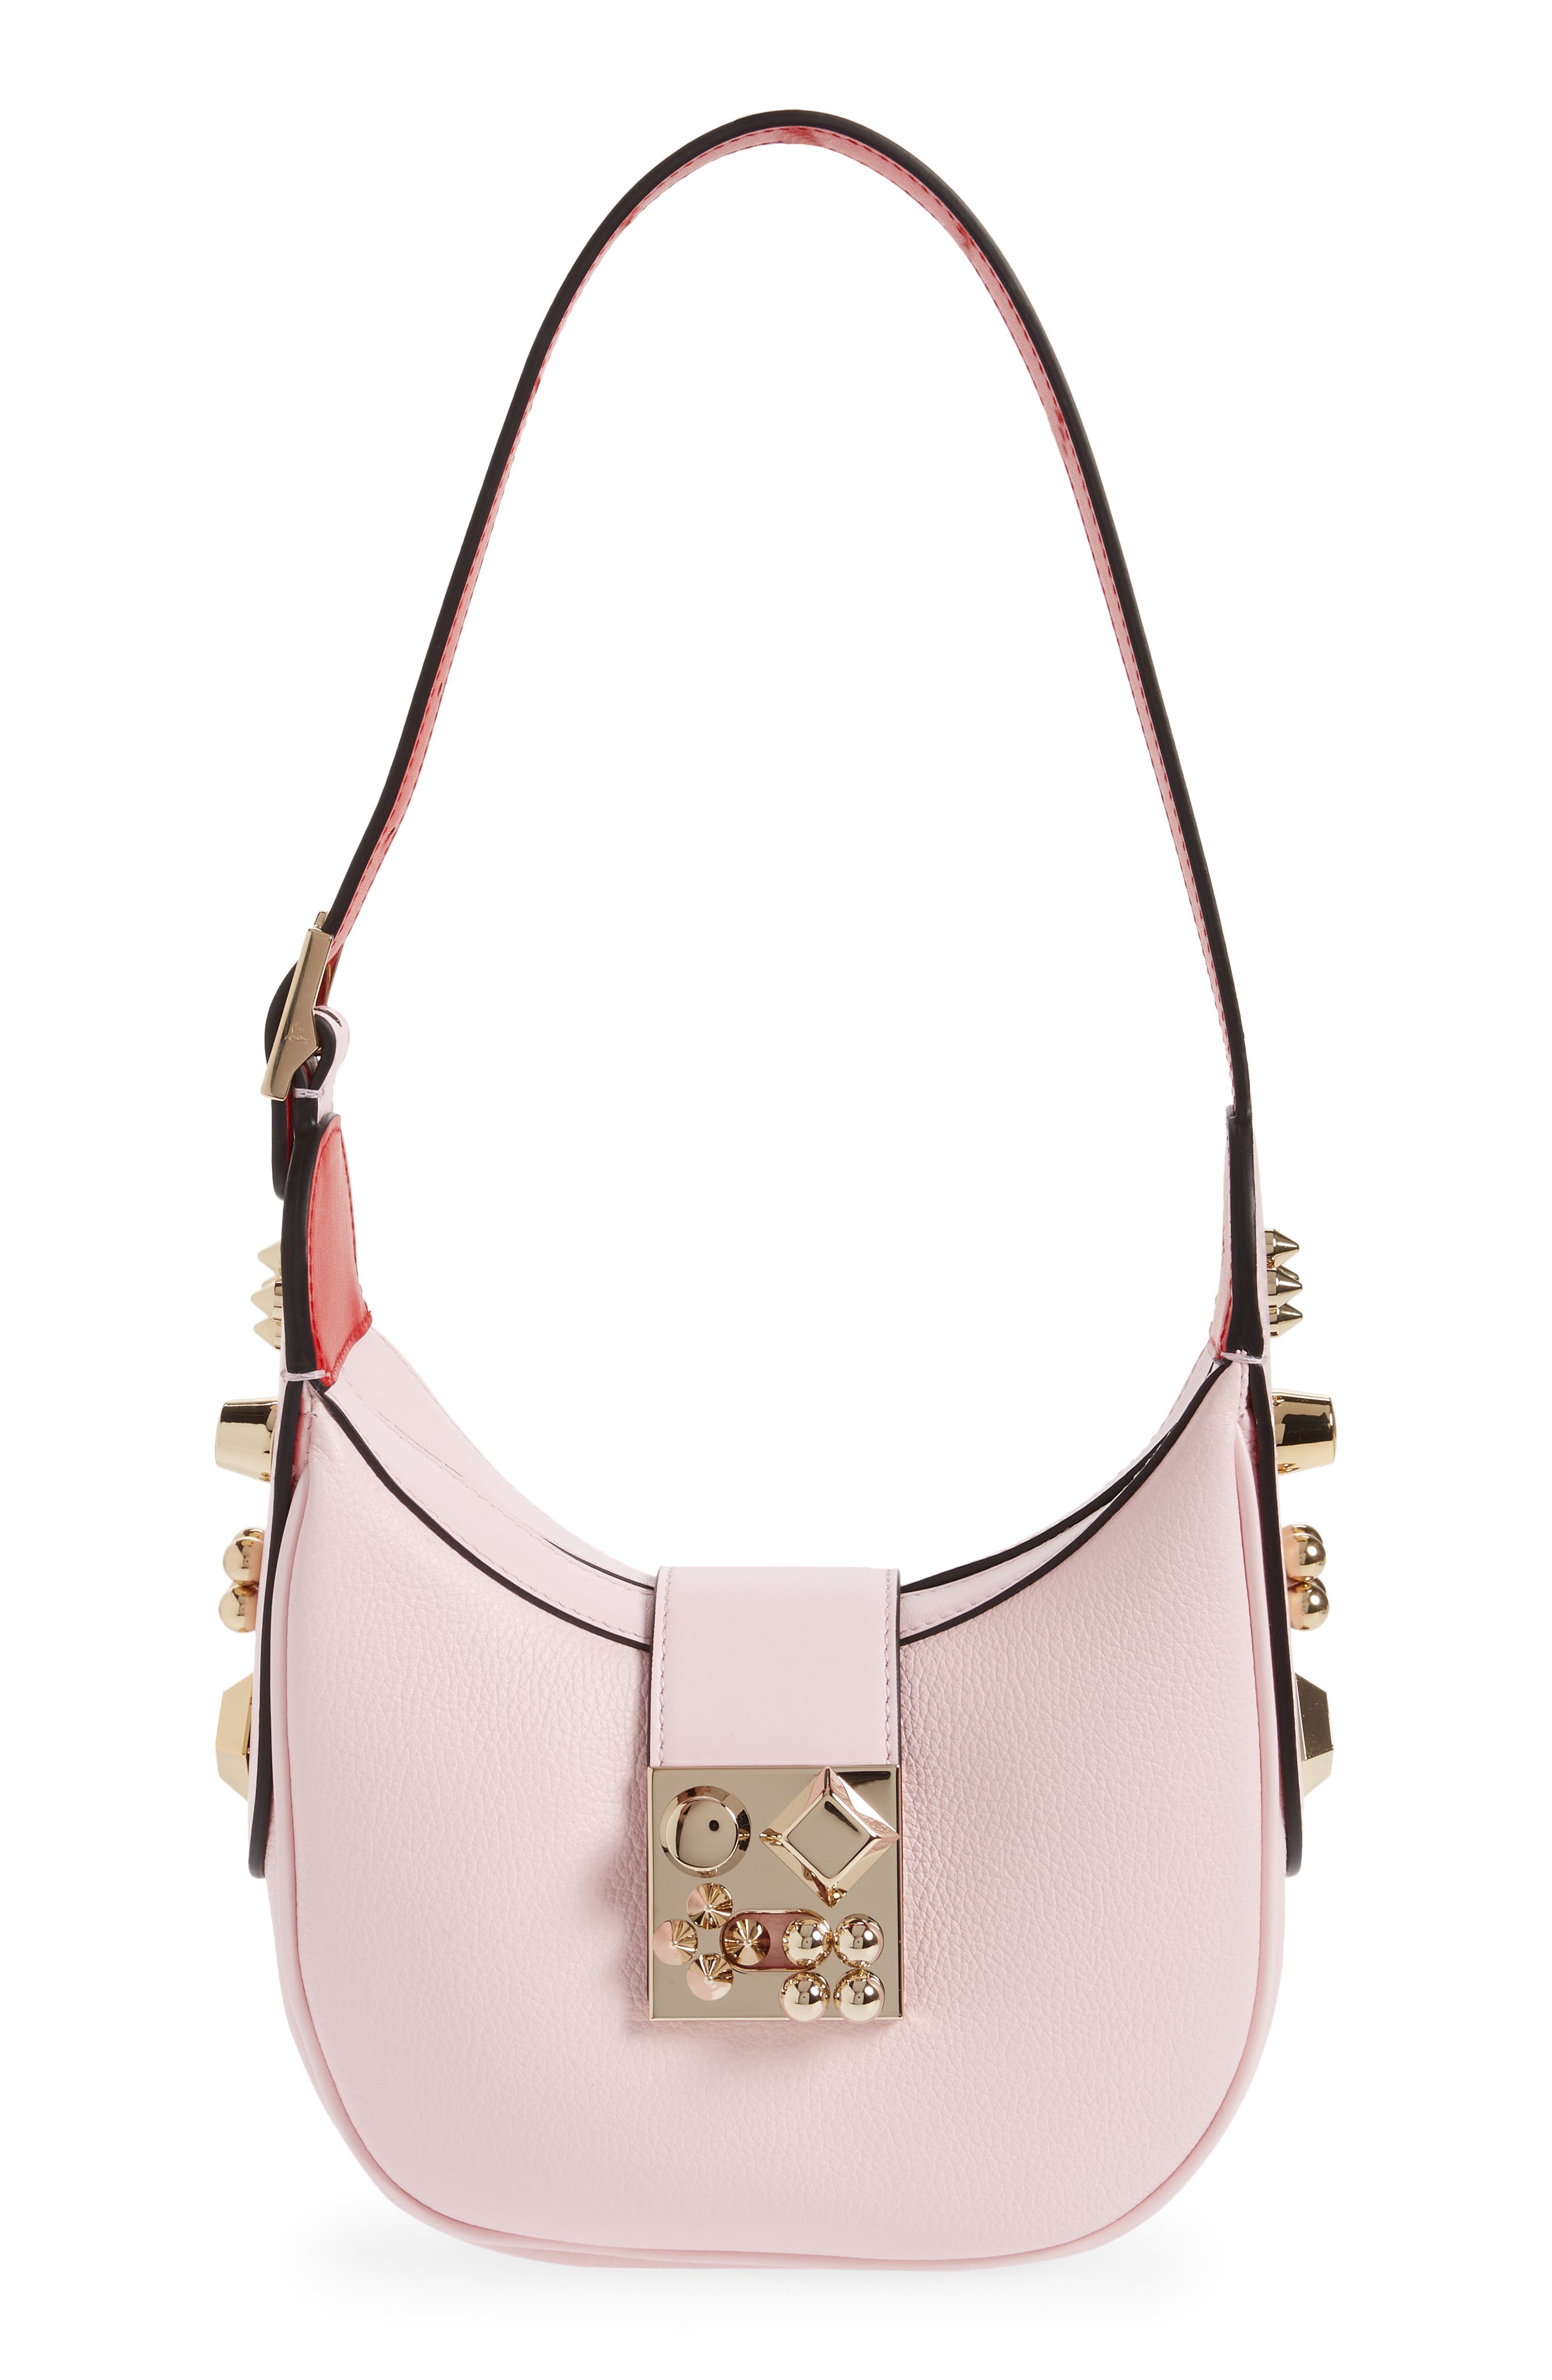 Christian Louboutin Mini Carasky Leather Hobo Bag in Poupee/Gold at Nordstrom